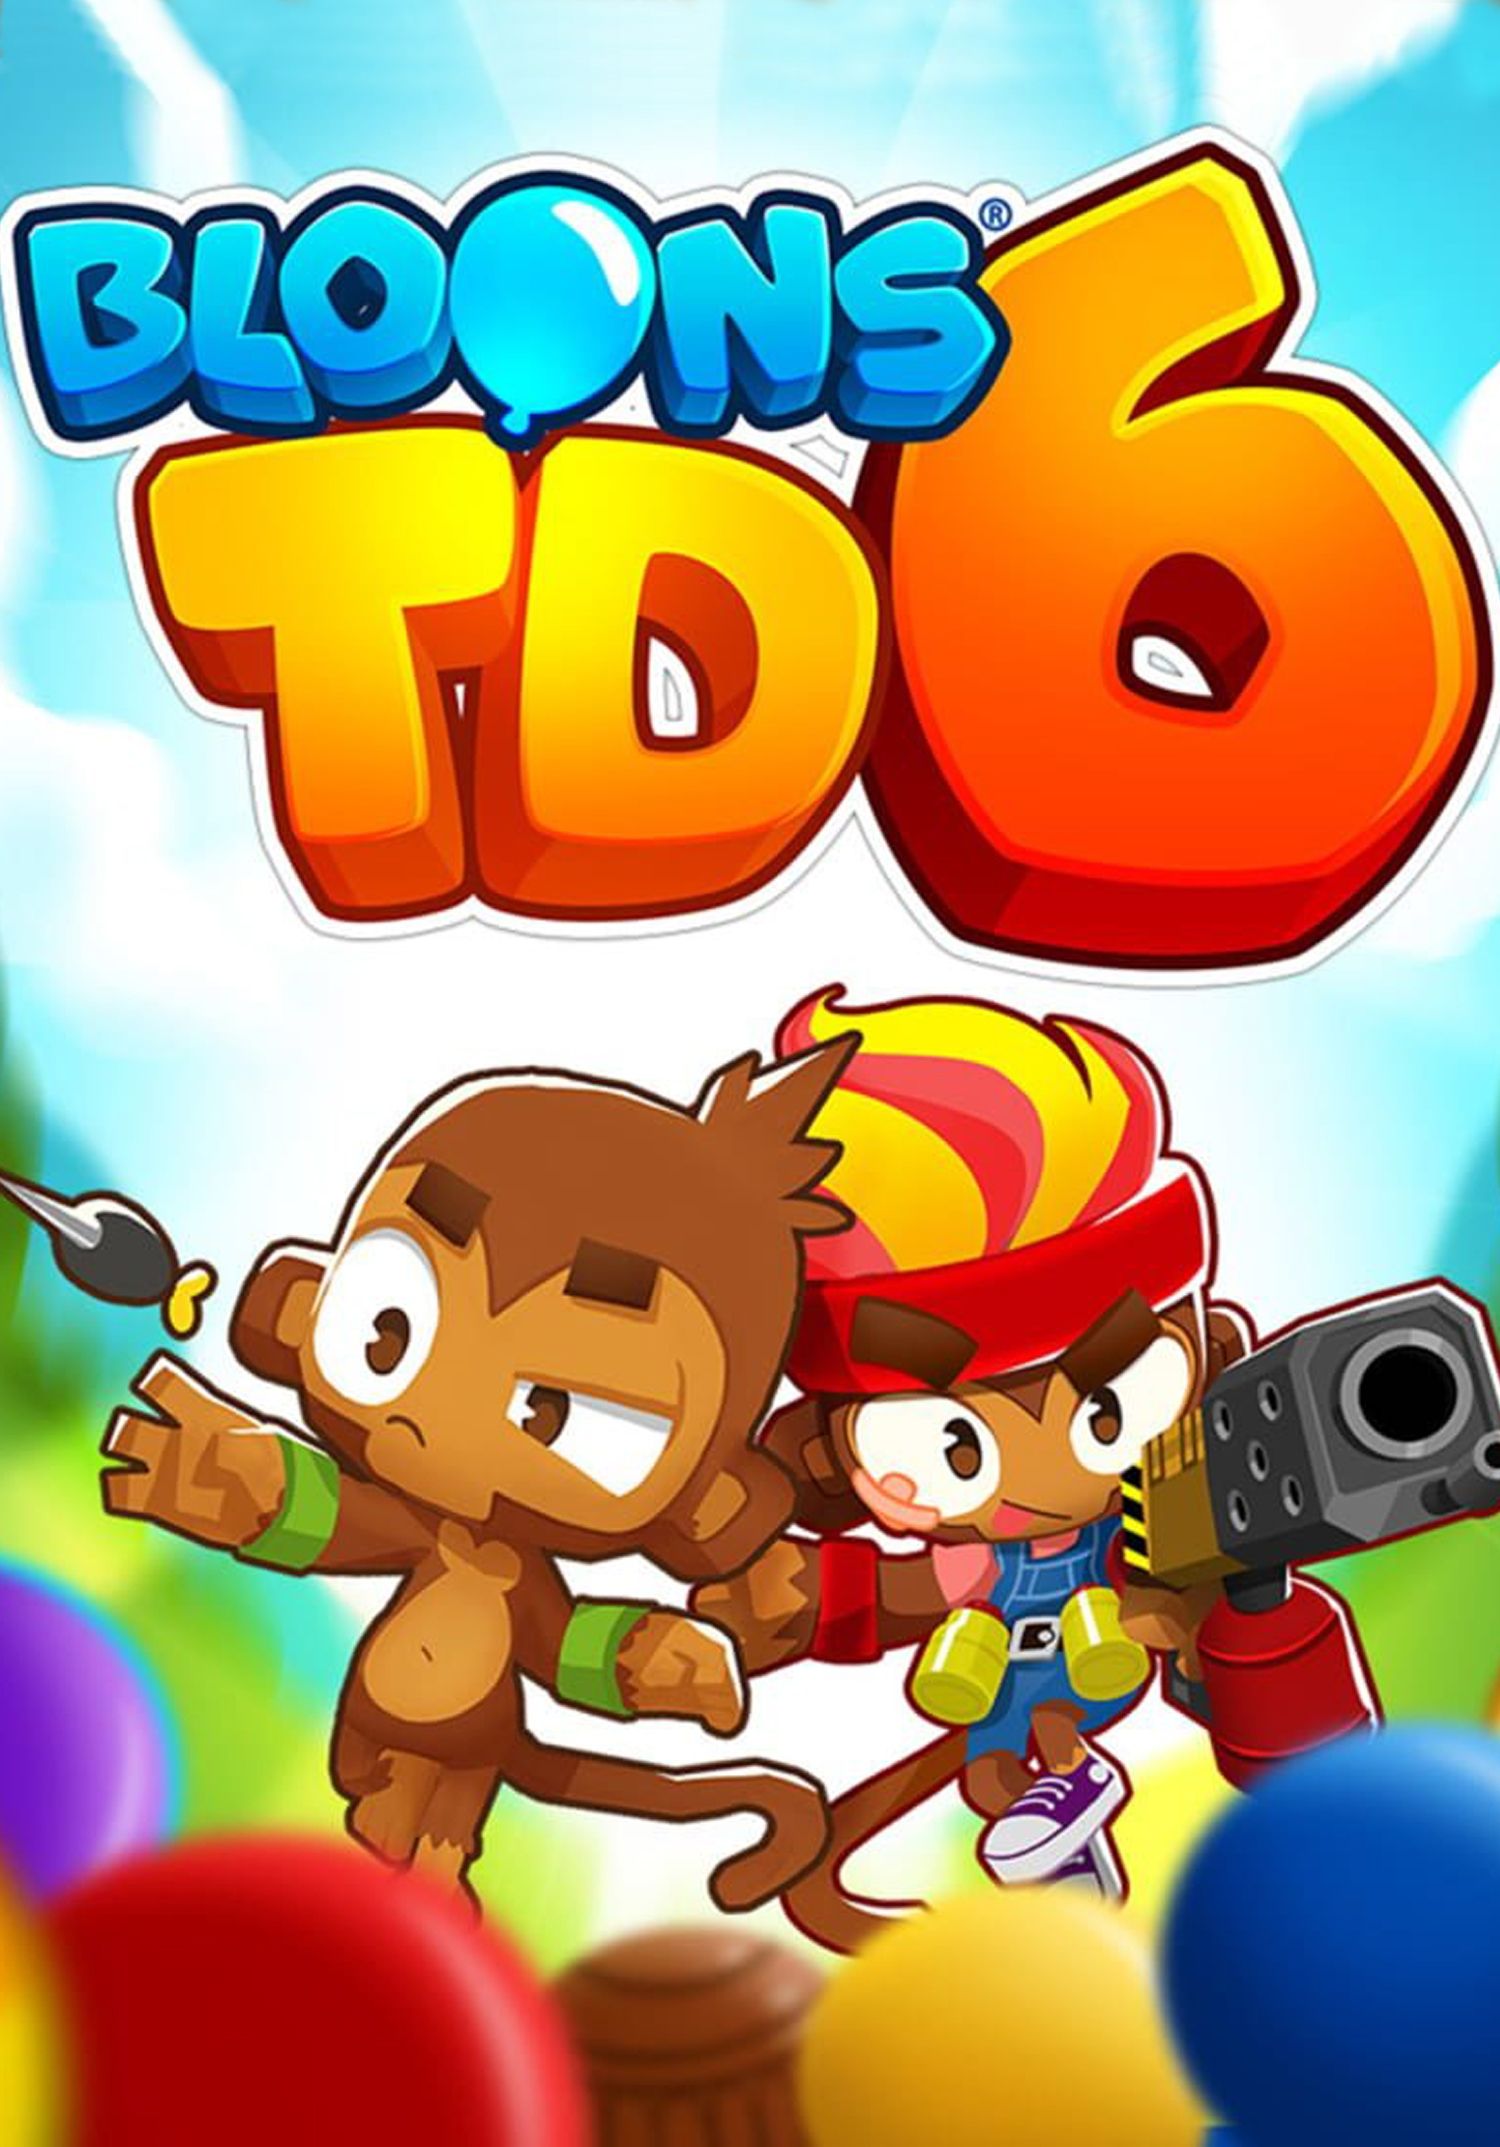 bloons td 6 nox cheat engine